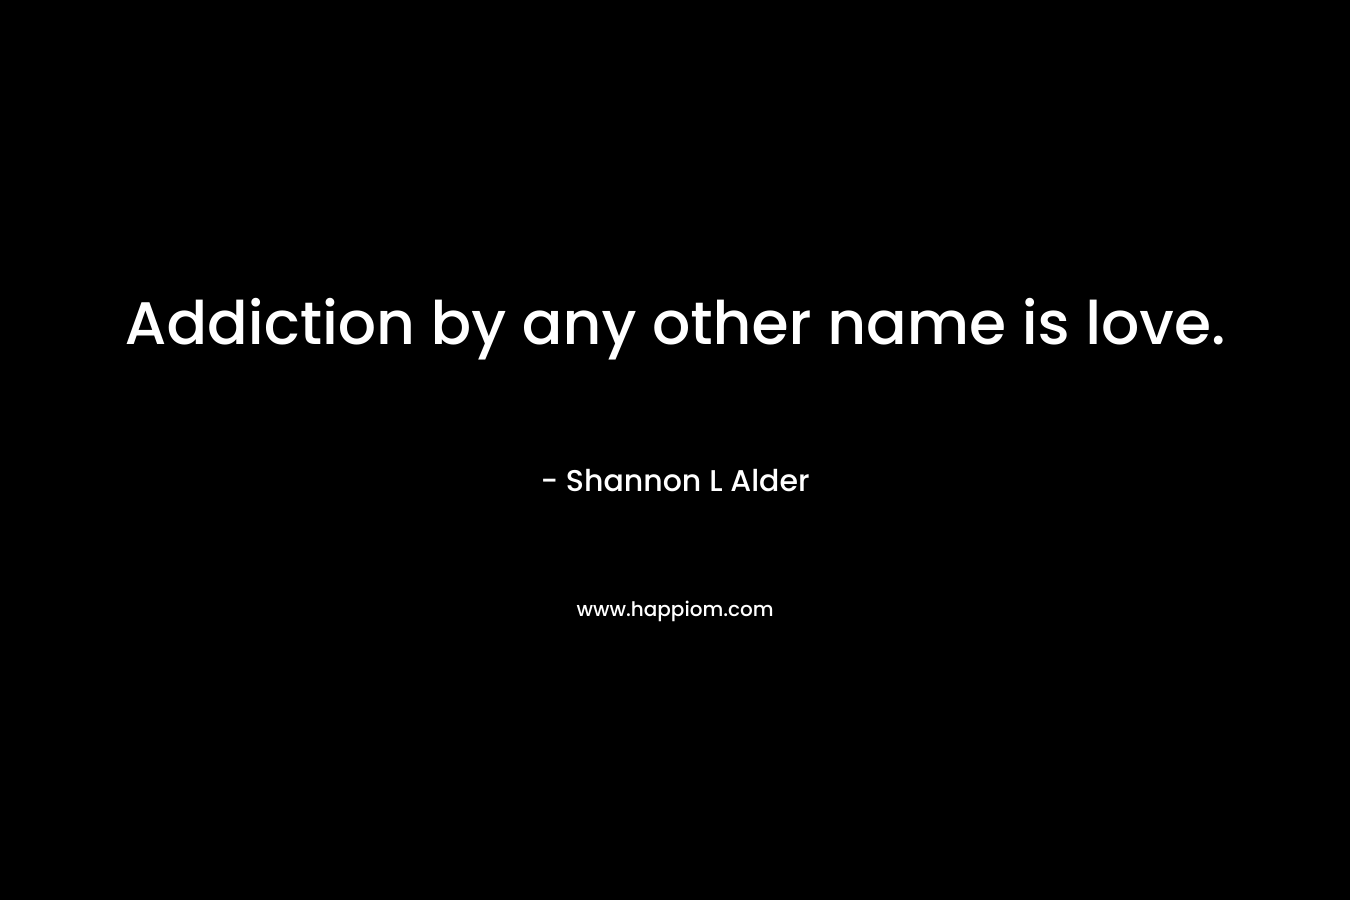 Addiction by any other name is love. – Shannon L Alder